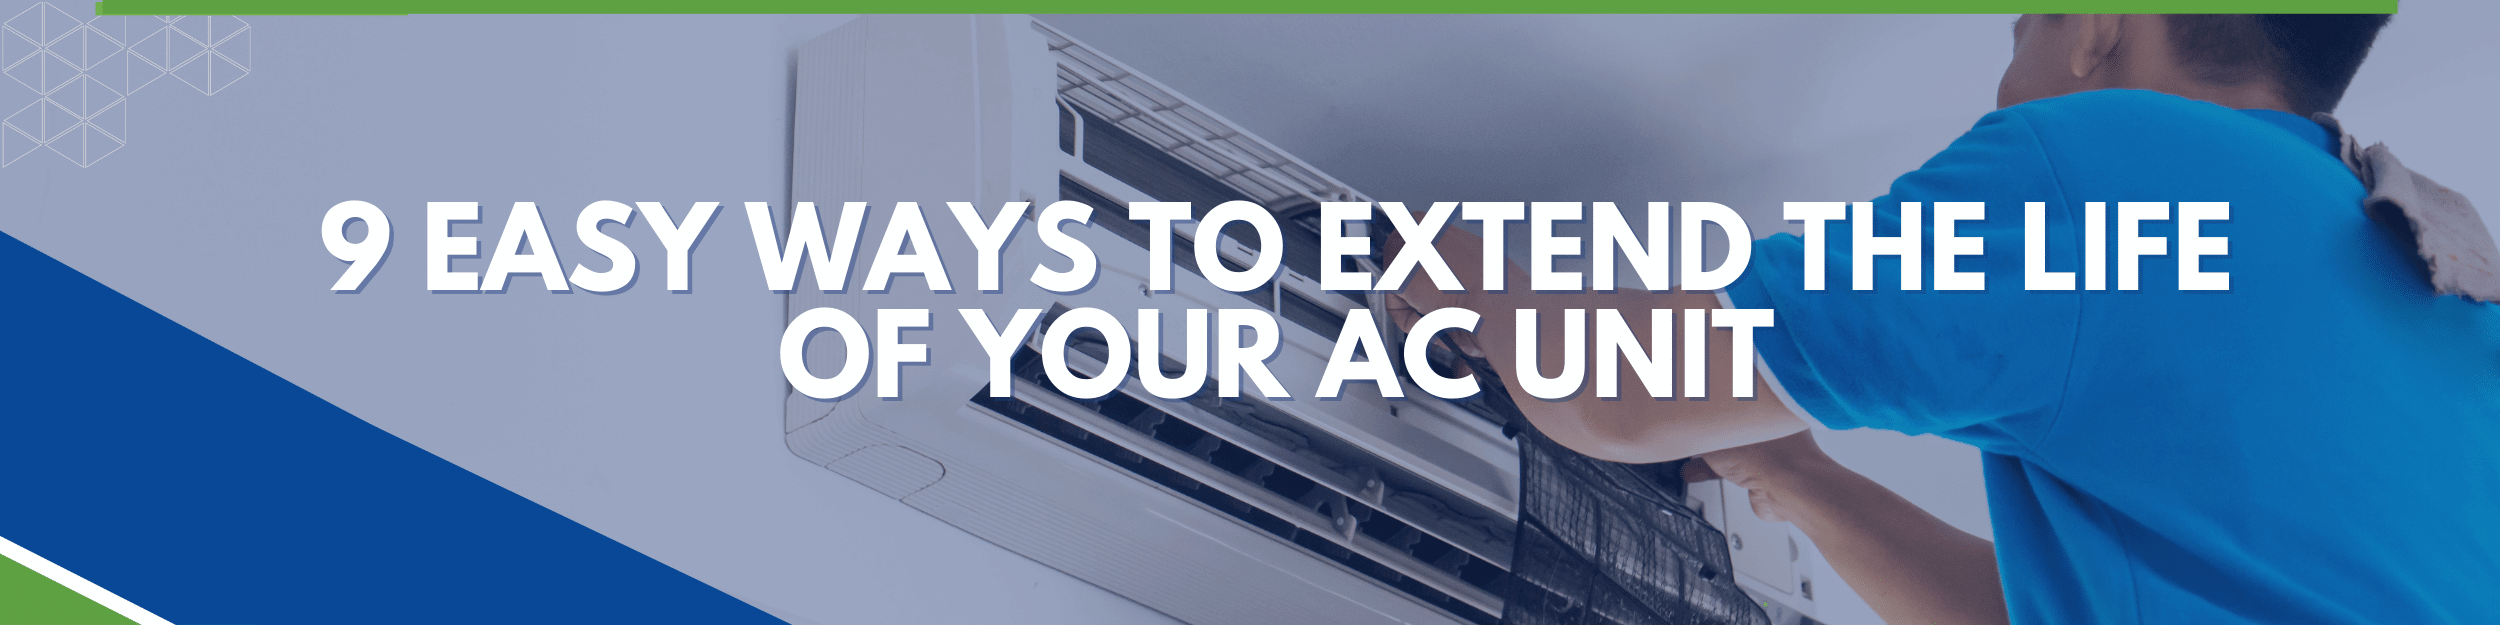 9 Easy Ways to Extend The Life of Your Air ConditioningUnit